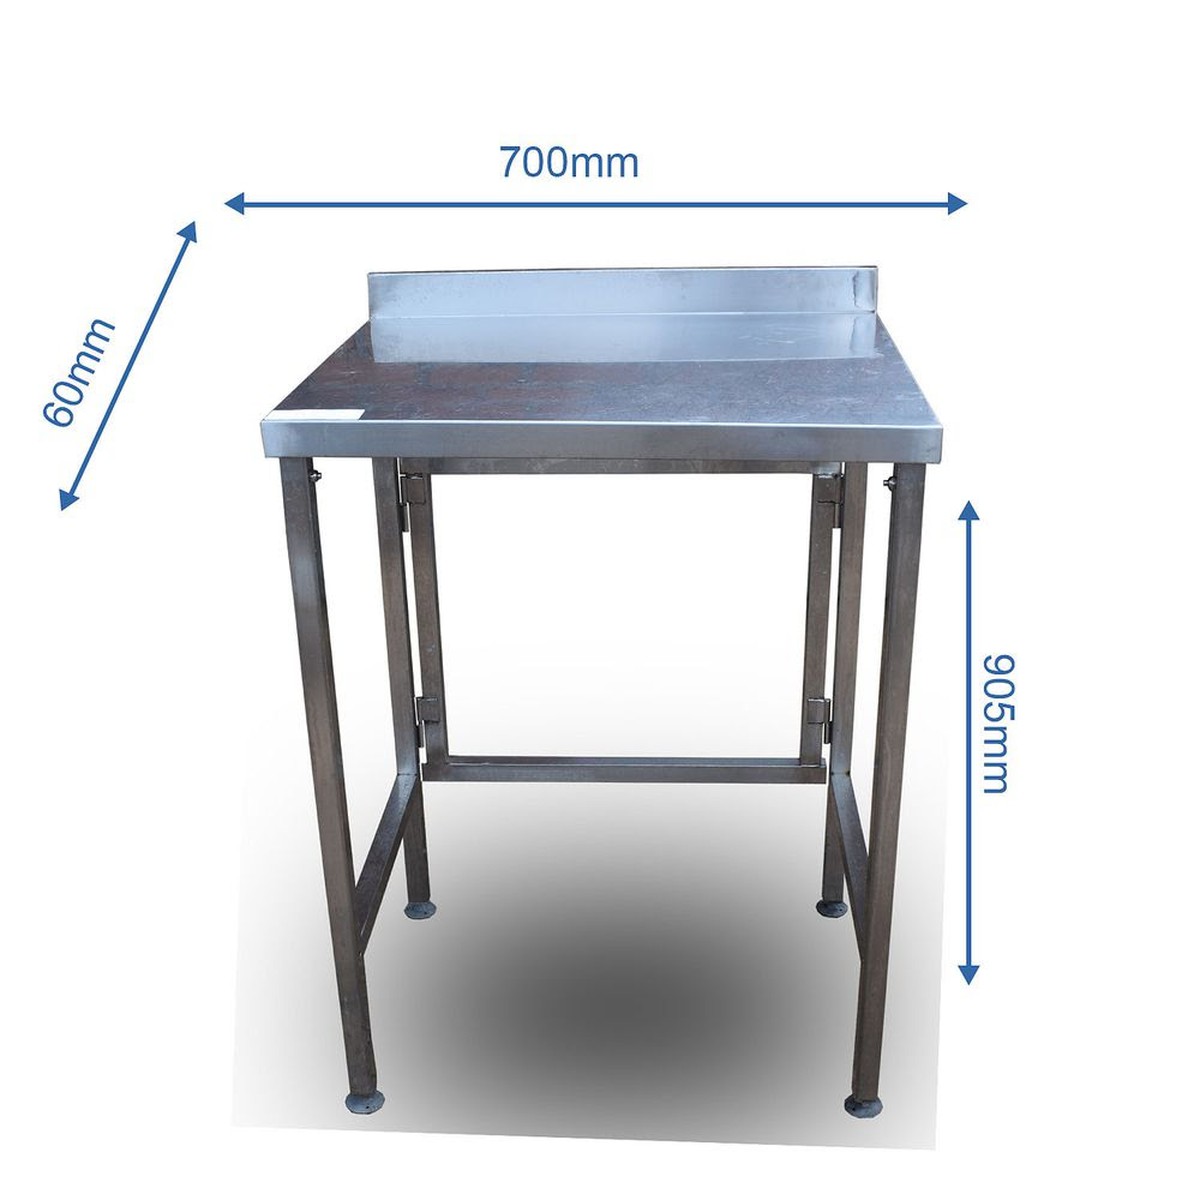 Secondhand Catering Equipment Stainless Steel Tables 0 1m